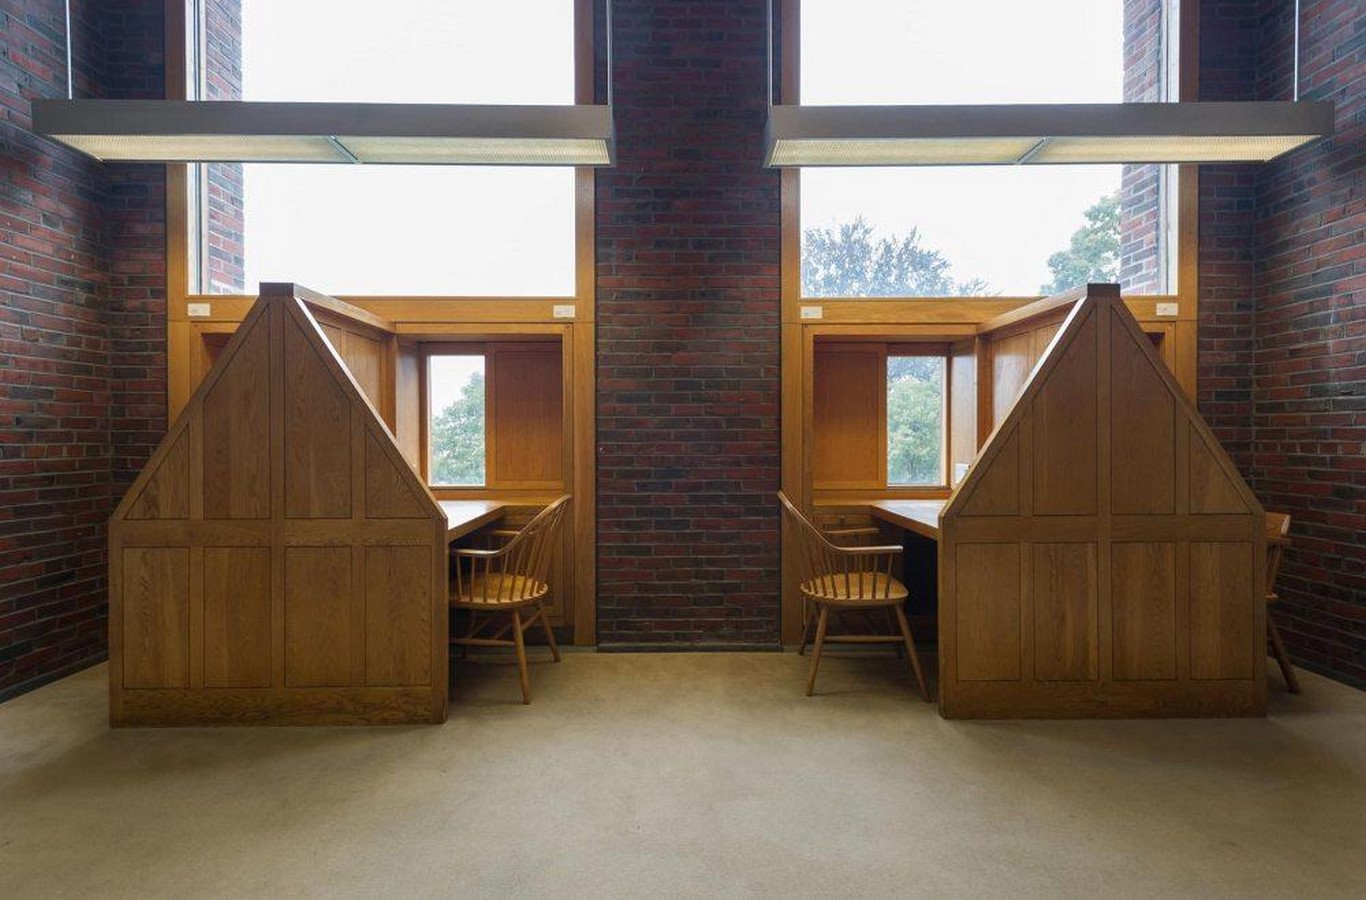 Philip Exeter Academy Library by Louis Kahn: The thoughtful making of spaces - Sheet3